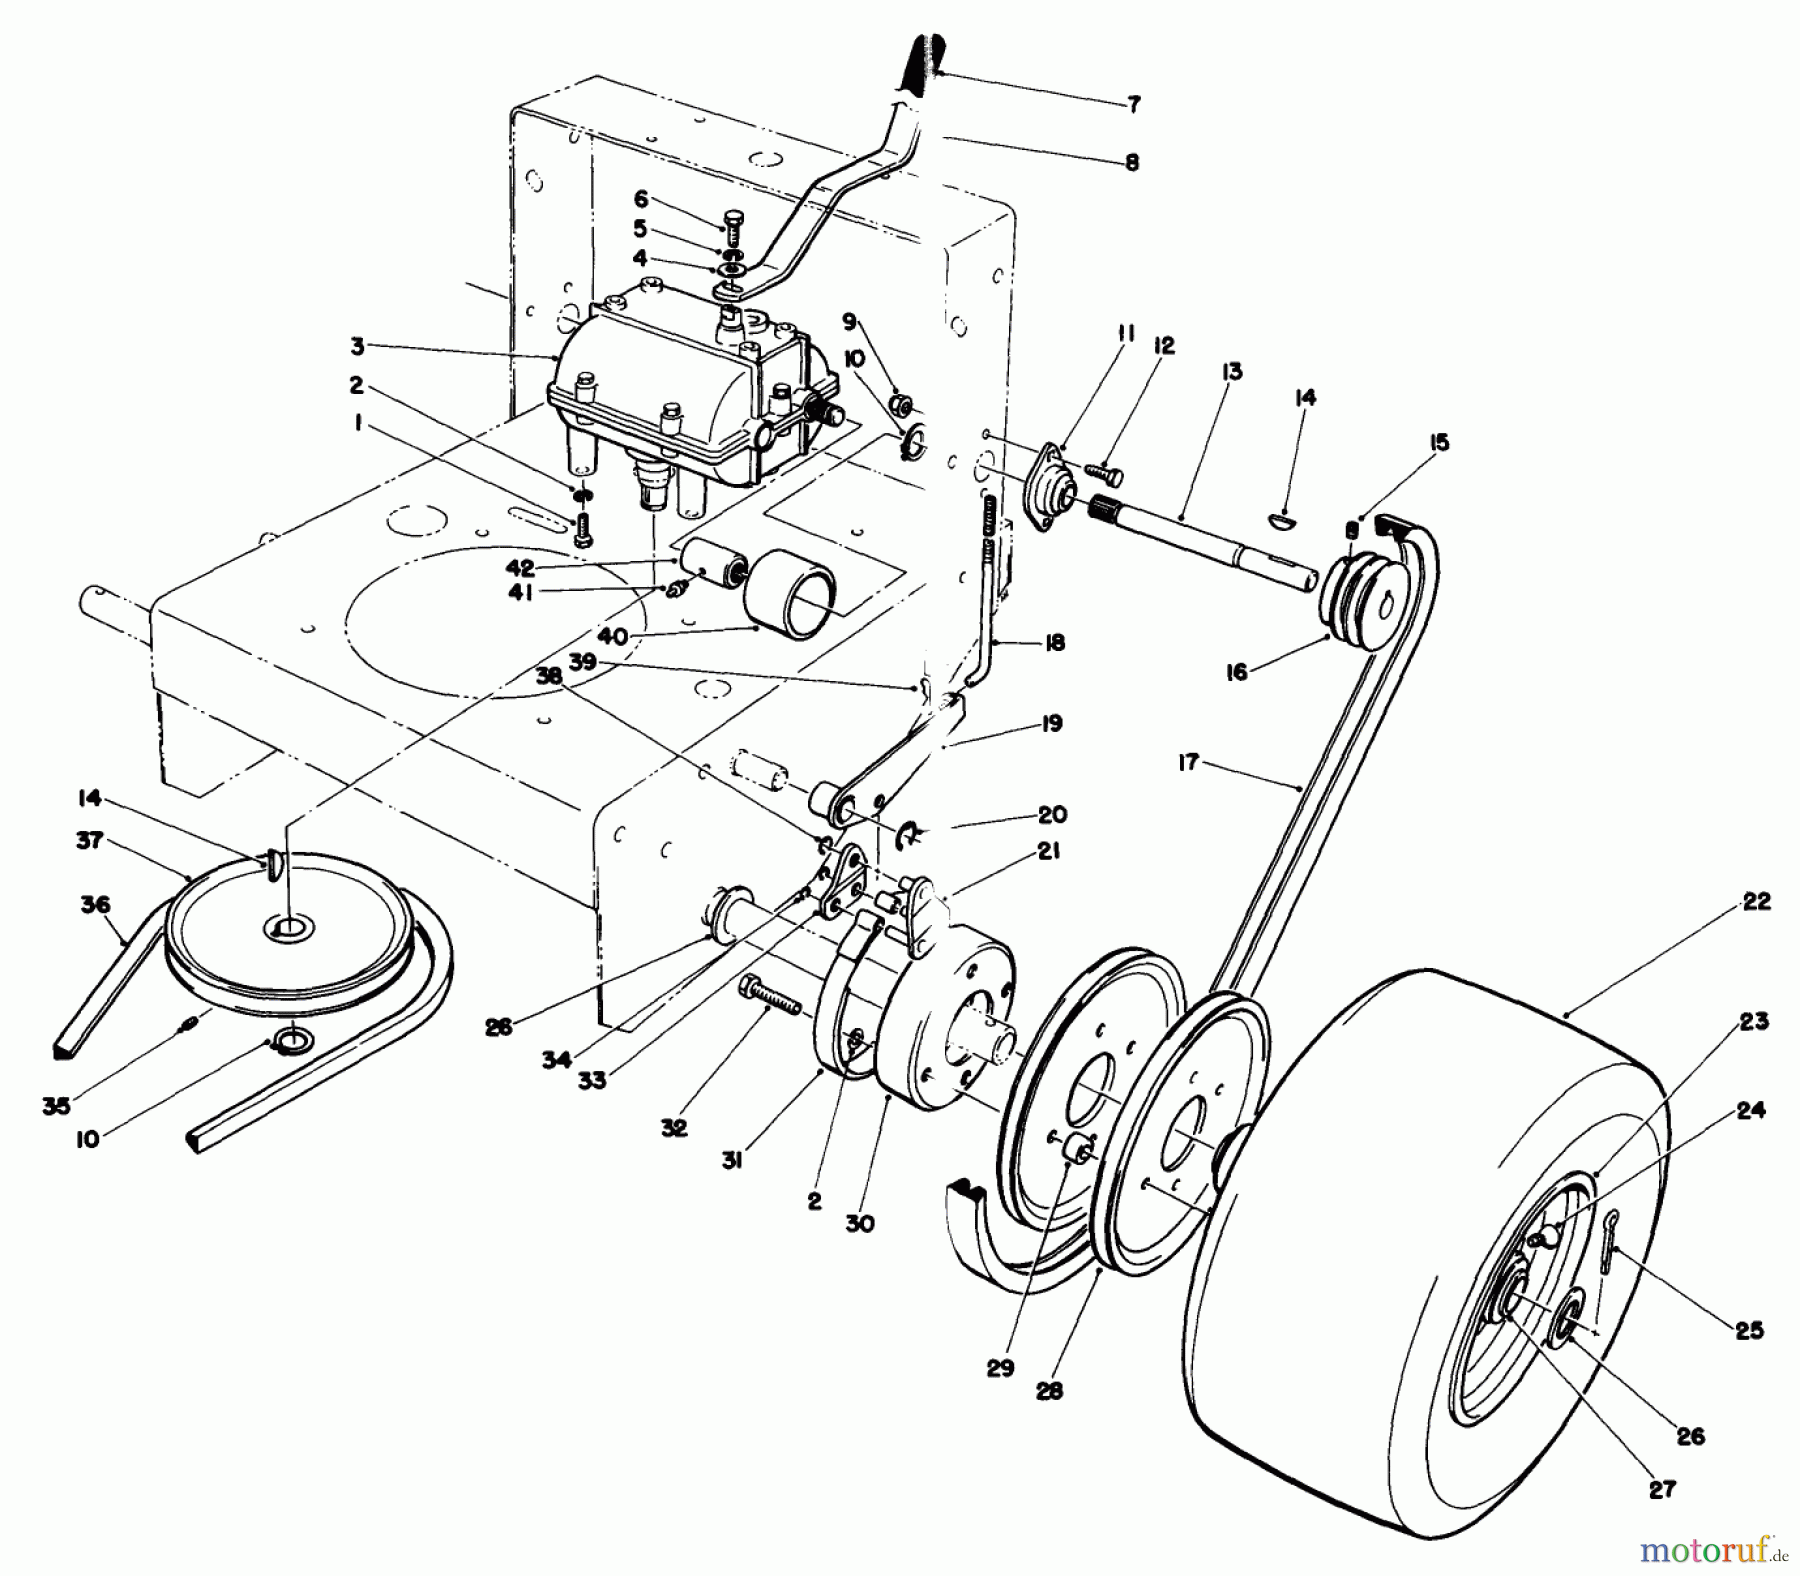  Toro Neu Mowers, Drive Unit Only 30113 - Toro Mid-Size Proline Gear Traction Unit, 8 hp, 1985 (5000001-5999999) AXLE ASSEMBLY